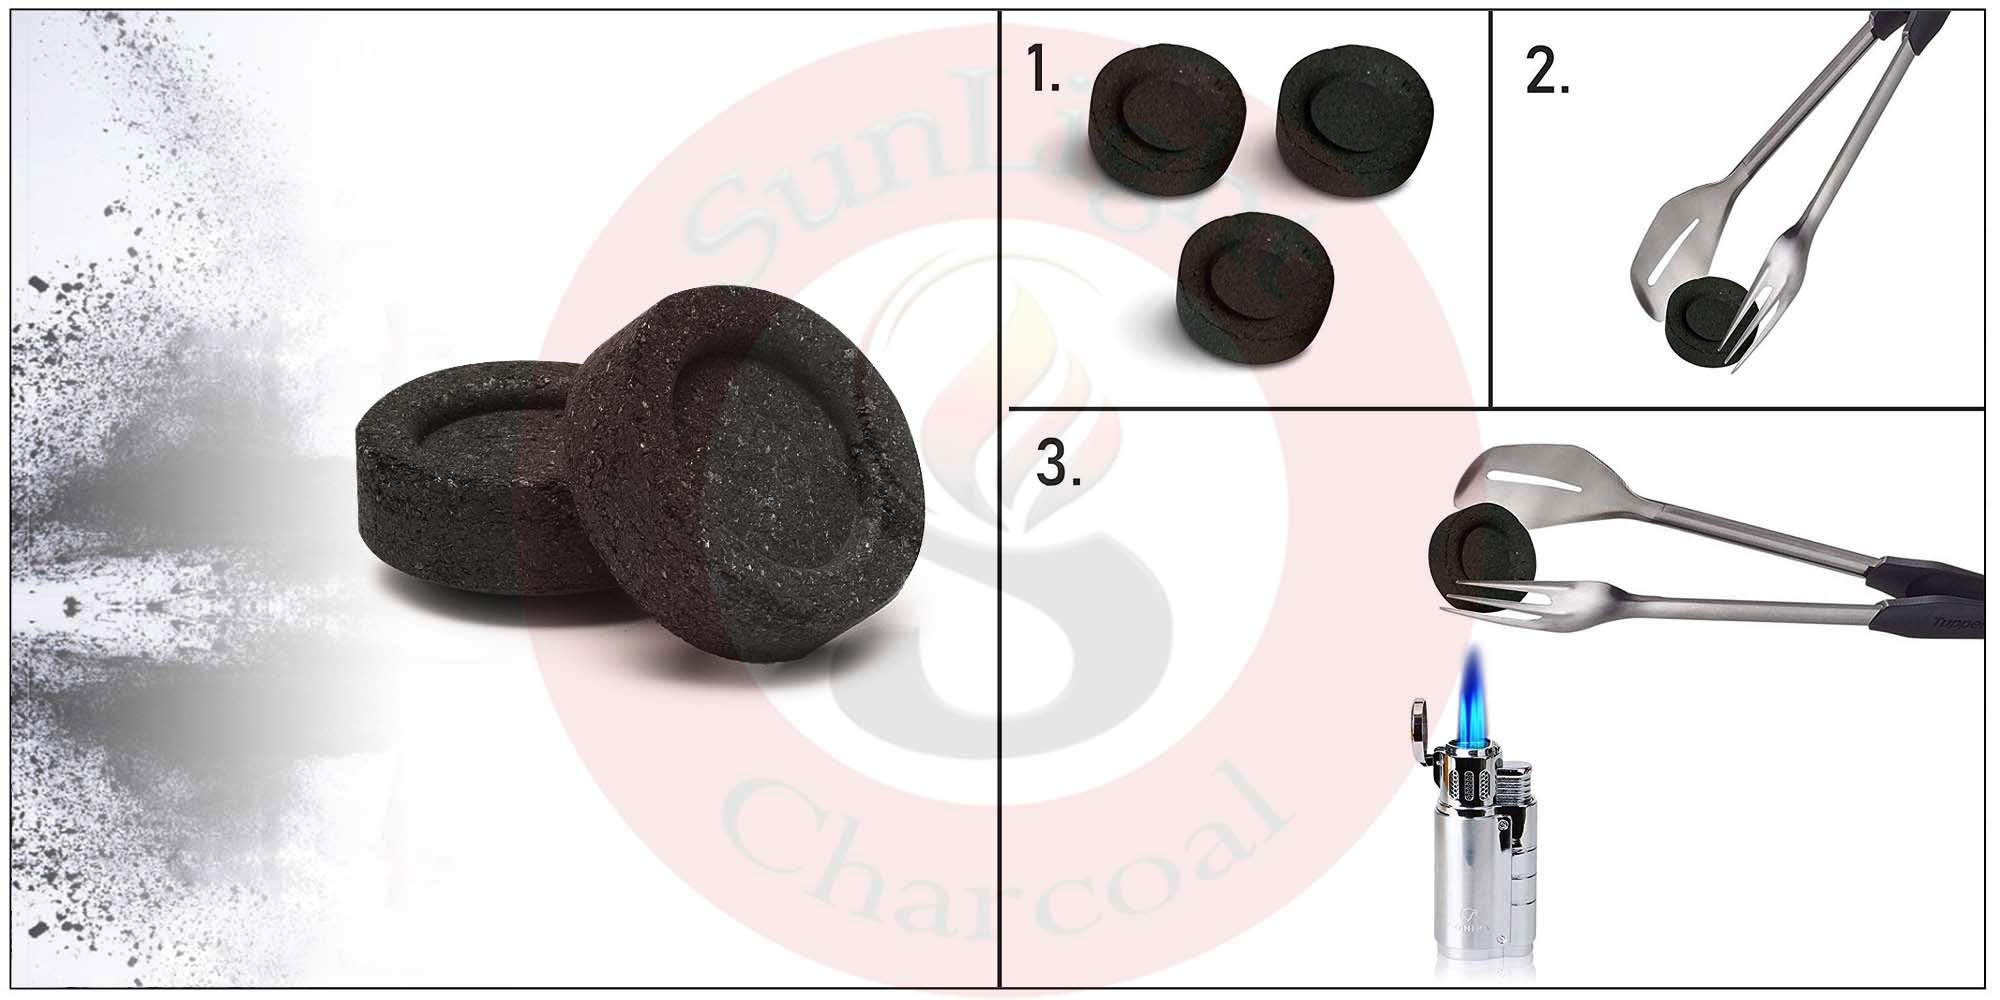 Charcoal Tablets for Incense – Quick Light Coal Tablets – Charcoal Disks – 33 mm Coal Rolls – Pack of 10 Coal Briquettes – Slow Burn - Instant Lighting (Roll of Charcoal Discs)